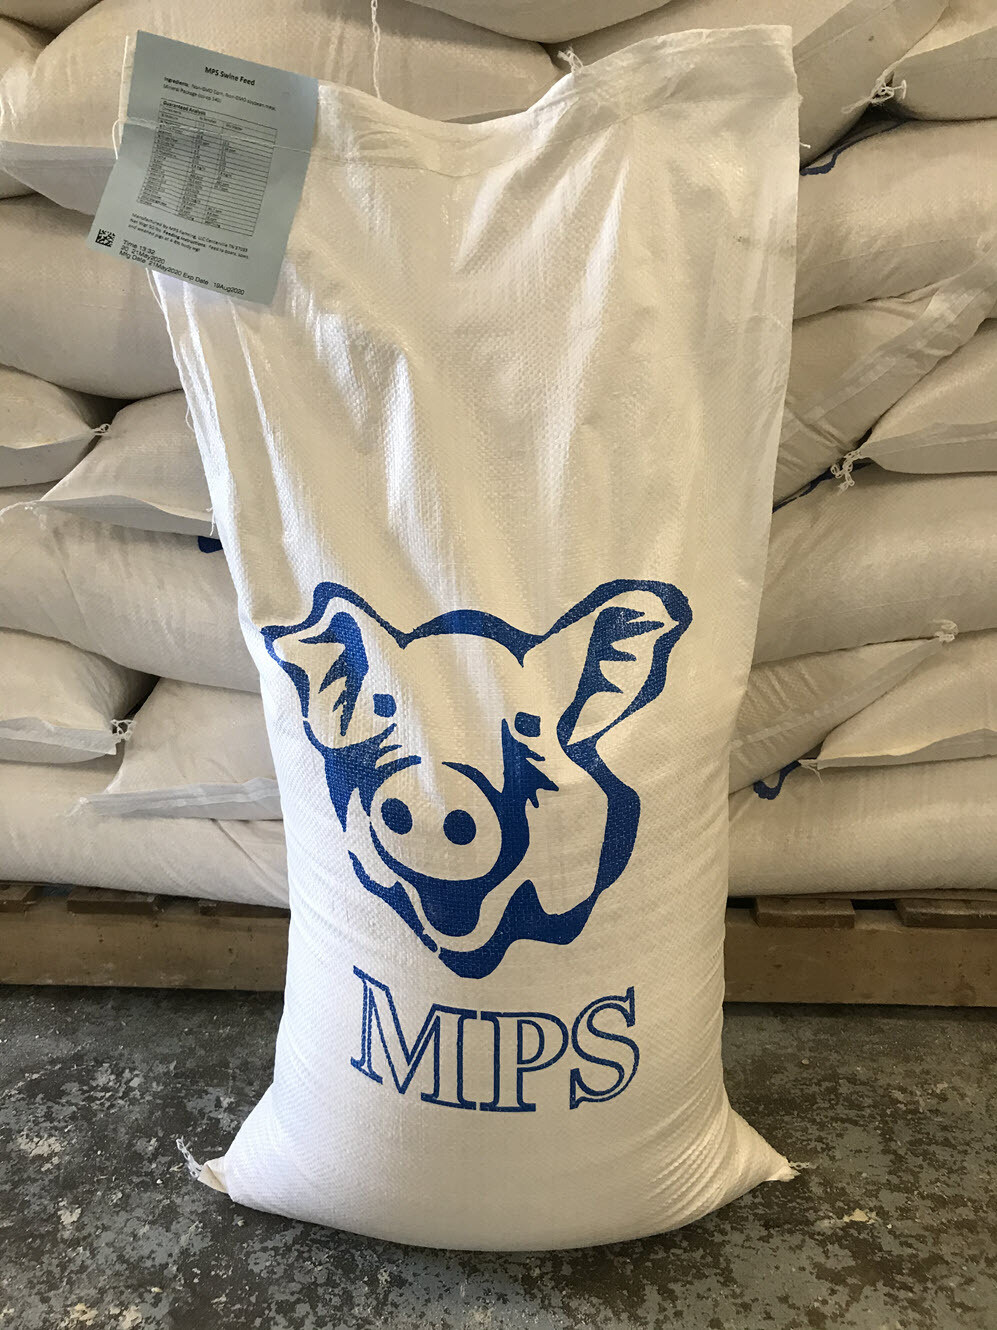 Weaned Pig Non-GMO Feed